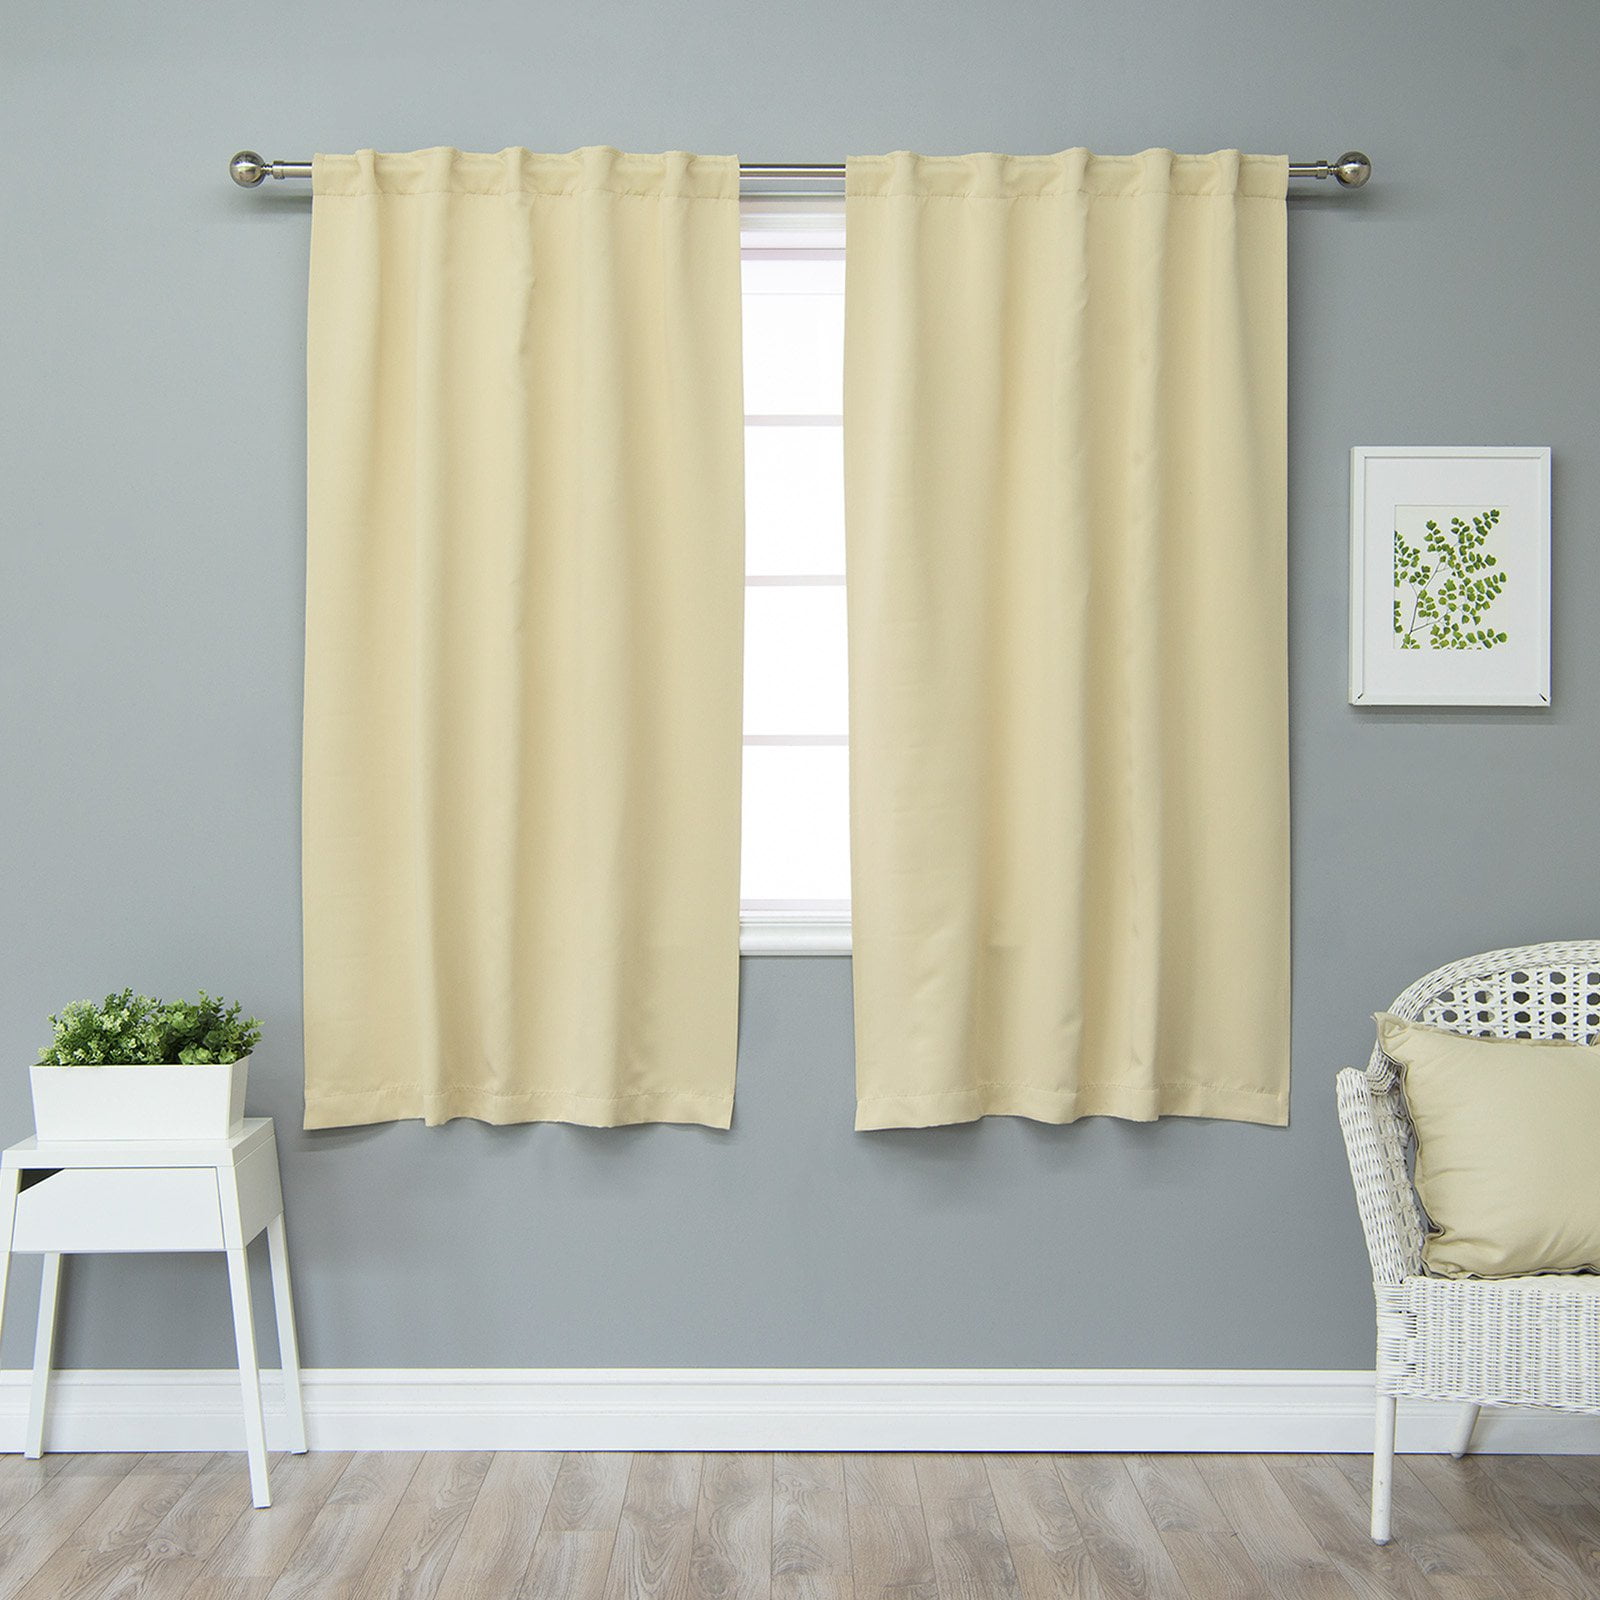 Best Home Fashion Solid Thermal Insulated Blackout Curtain Panel Pair